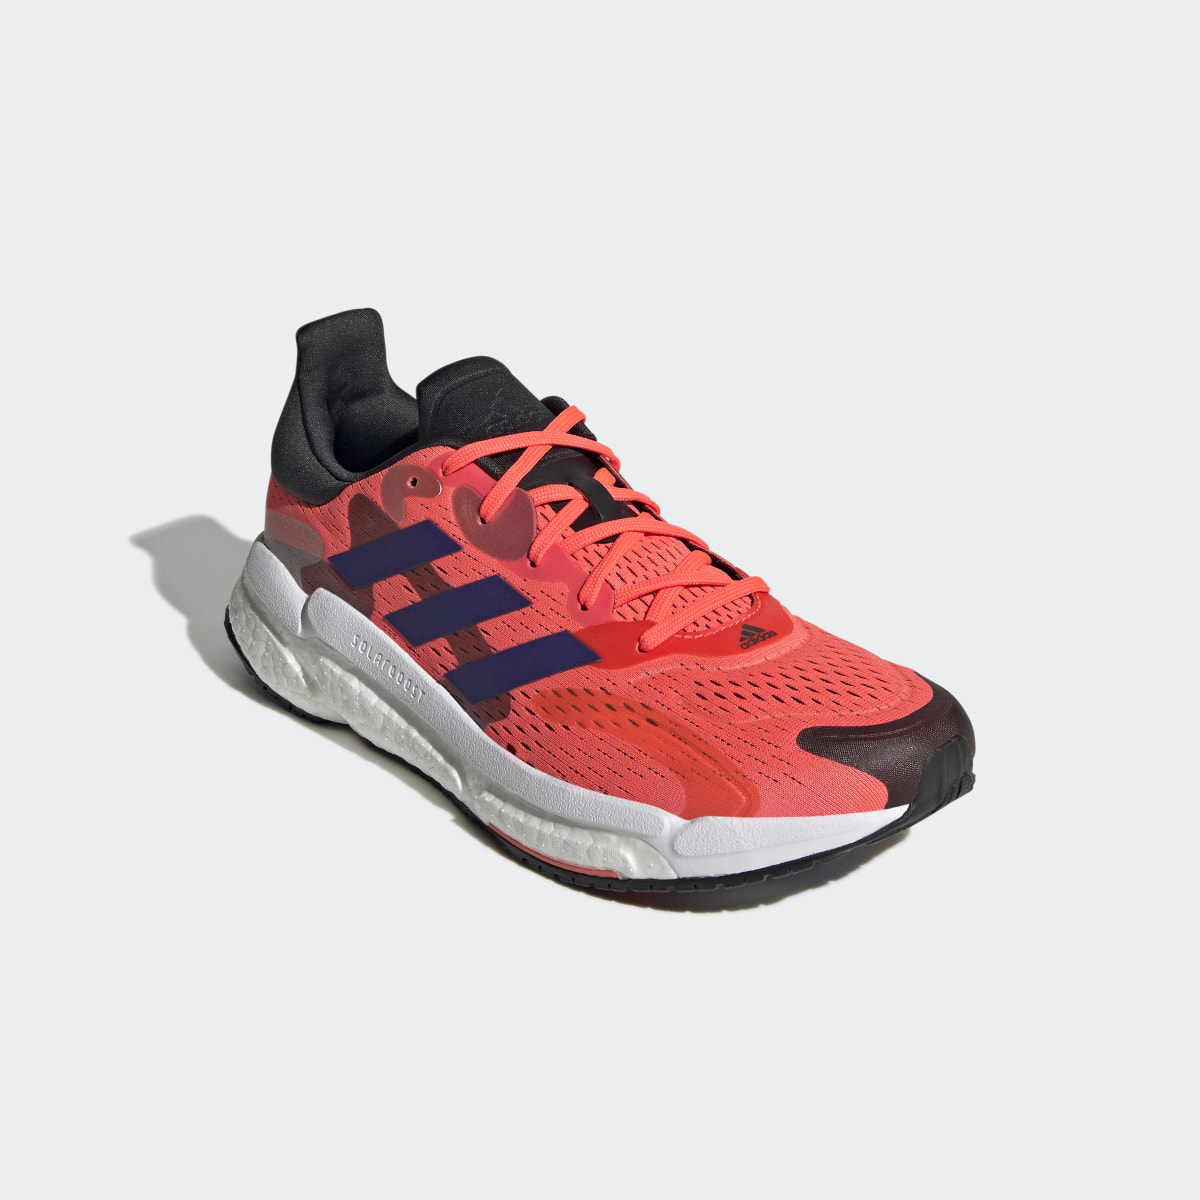 Adidas Solarboost 4 Shoes. 5